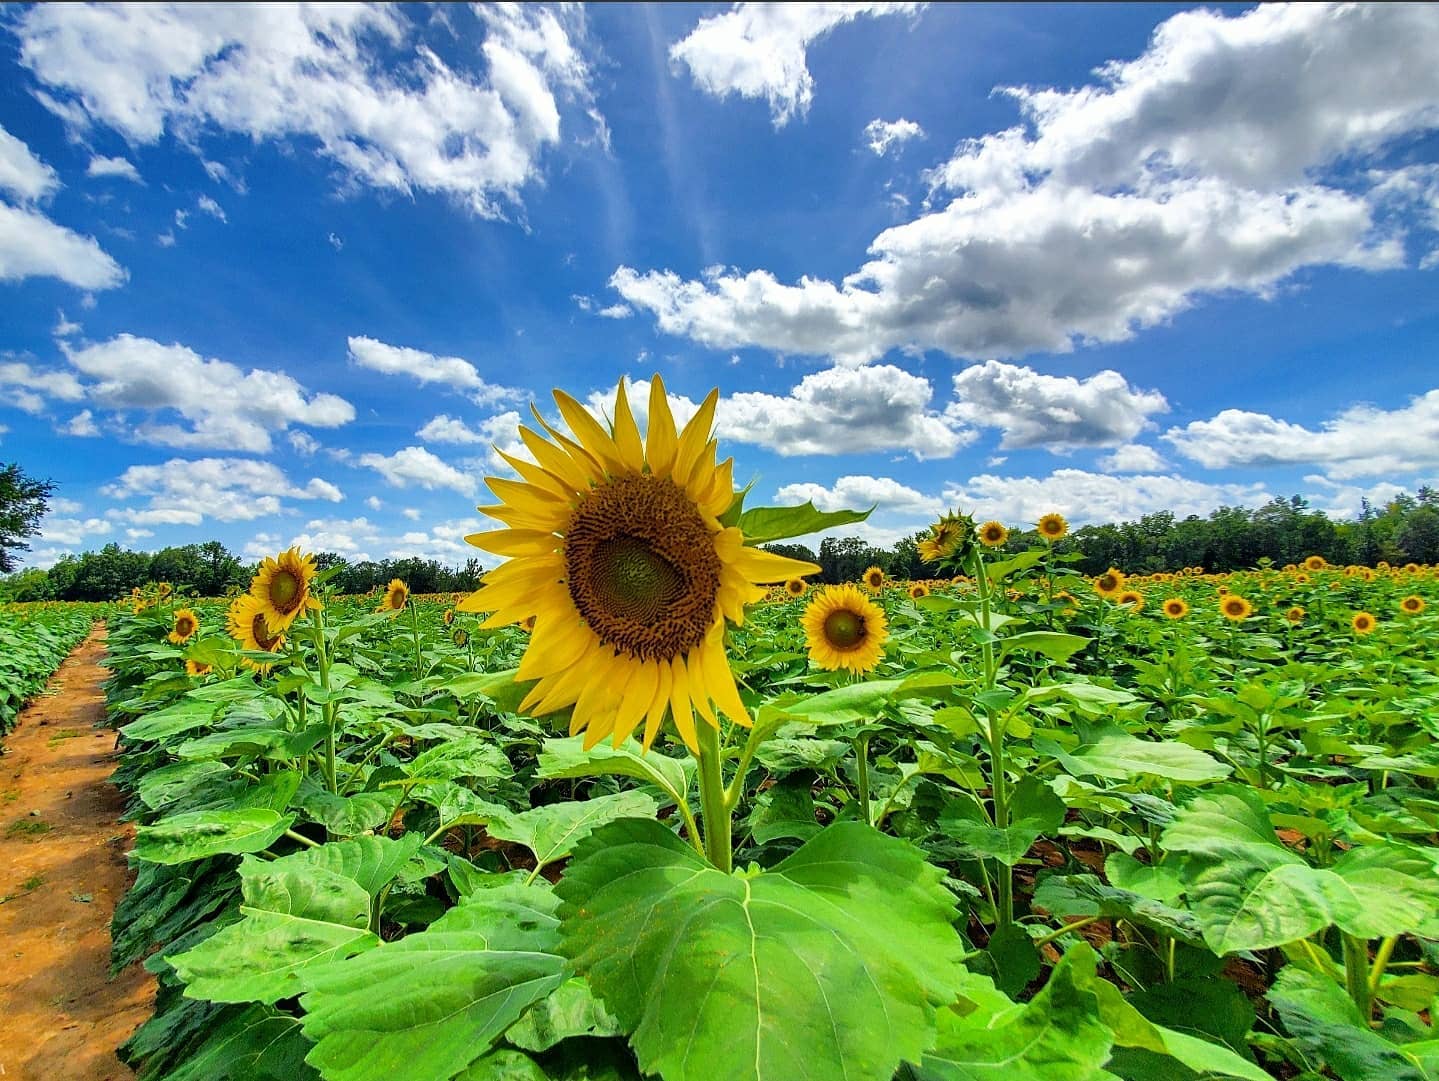 The Sunflower Field Opens In Central